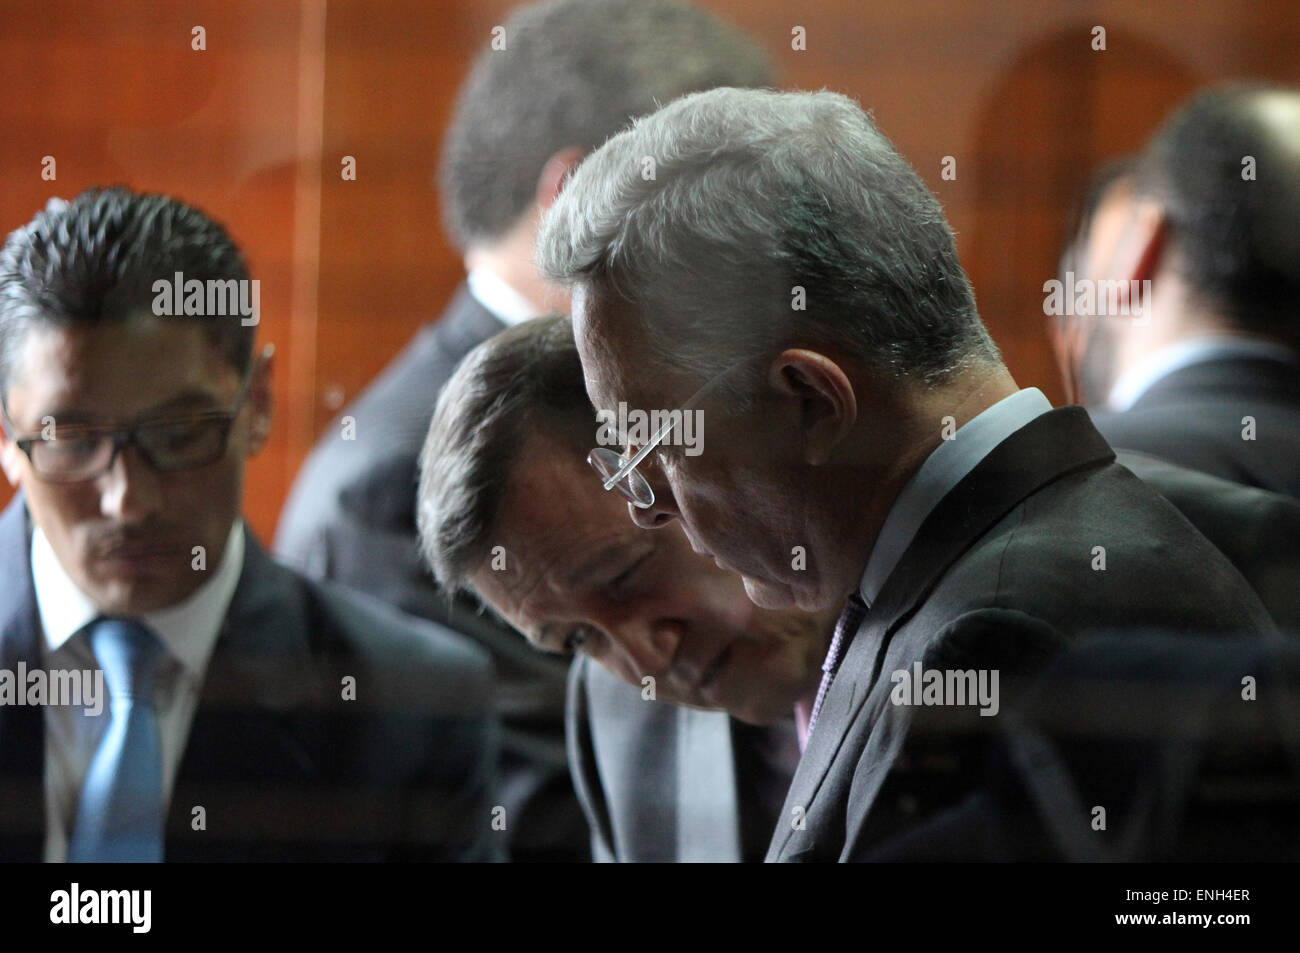 Bogota, Colombia. 5th May, 2015. Former Colombian President Alvaro Uribe attends a hearing at the Supreme Court of Justice, in Bogota, Colombia, on May 5, 2015. According to the local press, Uribe testified before the Supreme Court in the framework of a research for his alleged links with a hacker that spied on the Colombian Government delegates and the Revolutionary Armed Forces of Colombia (FARC, for its acronym in Spanish) in the peace process with Cuba. © German Enciso/COLPRENSA/Xinhua/Alamy Live News Stock Photo